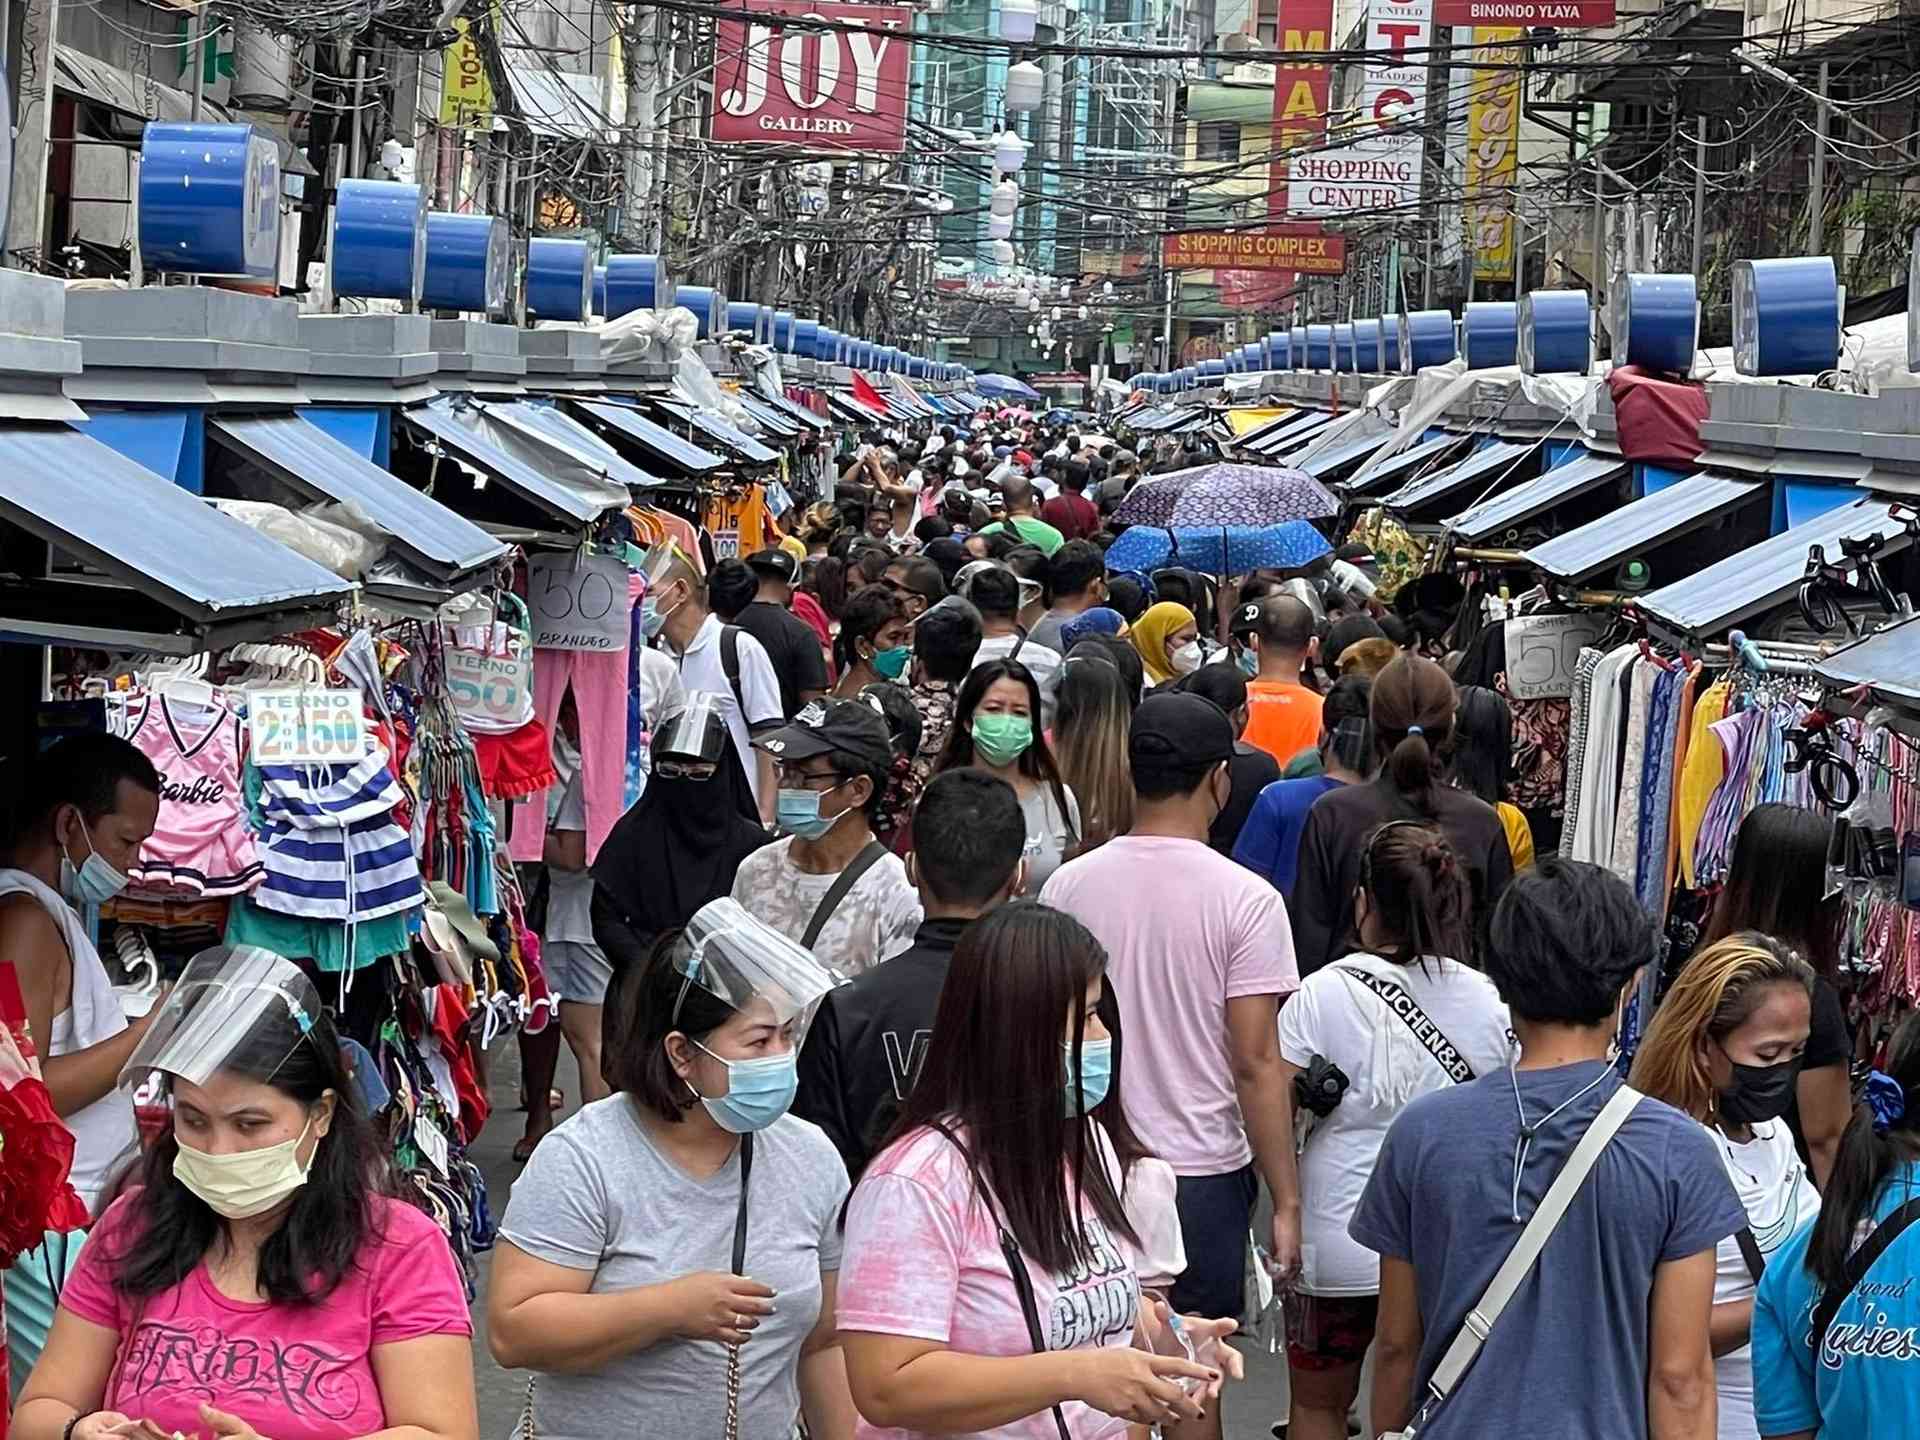 Unemployment rate in PH down to 3.5% — PSA